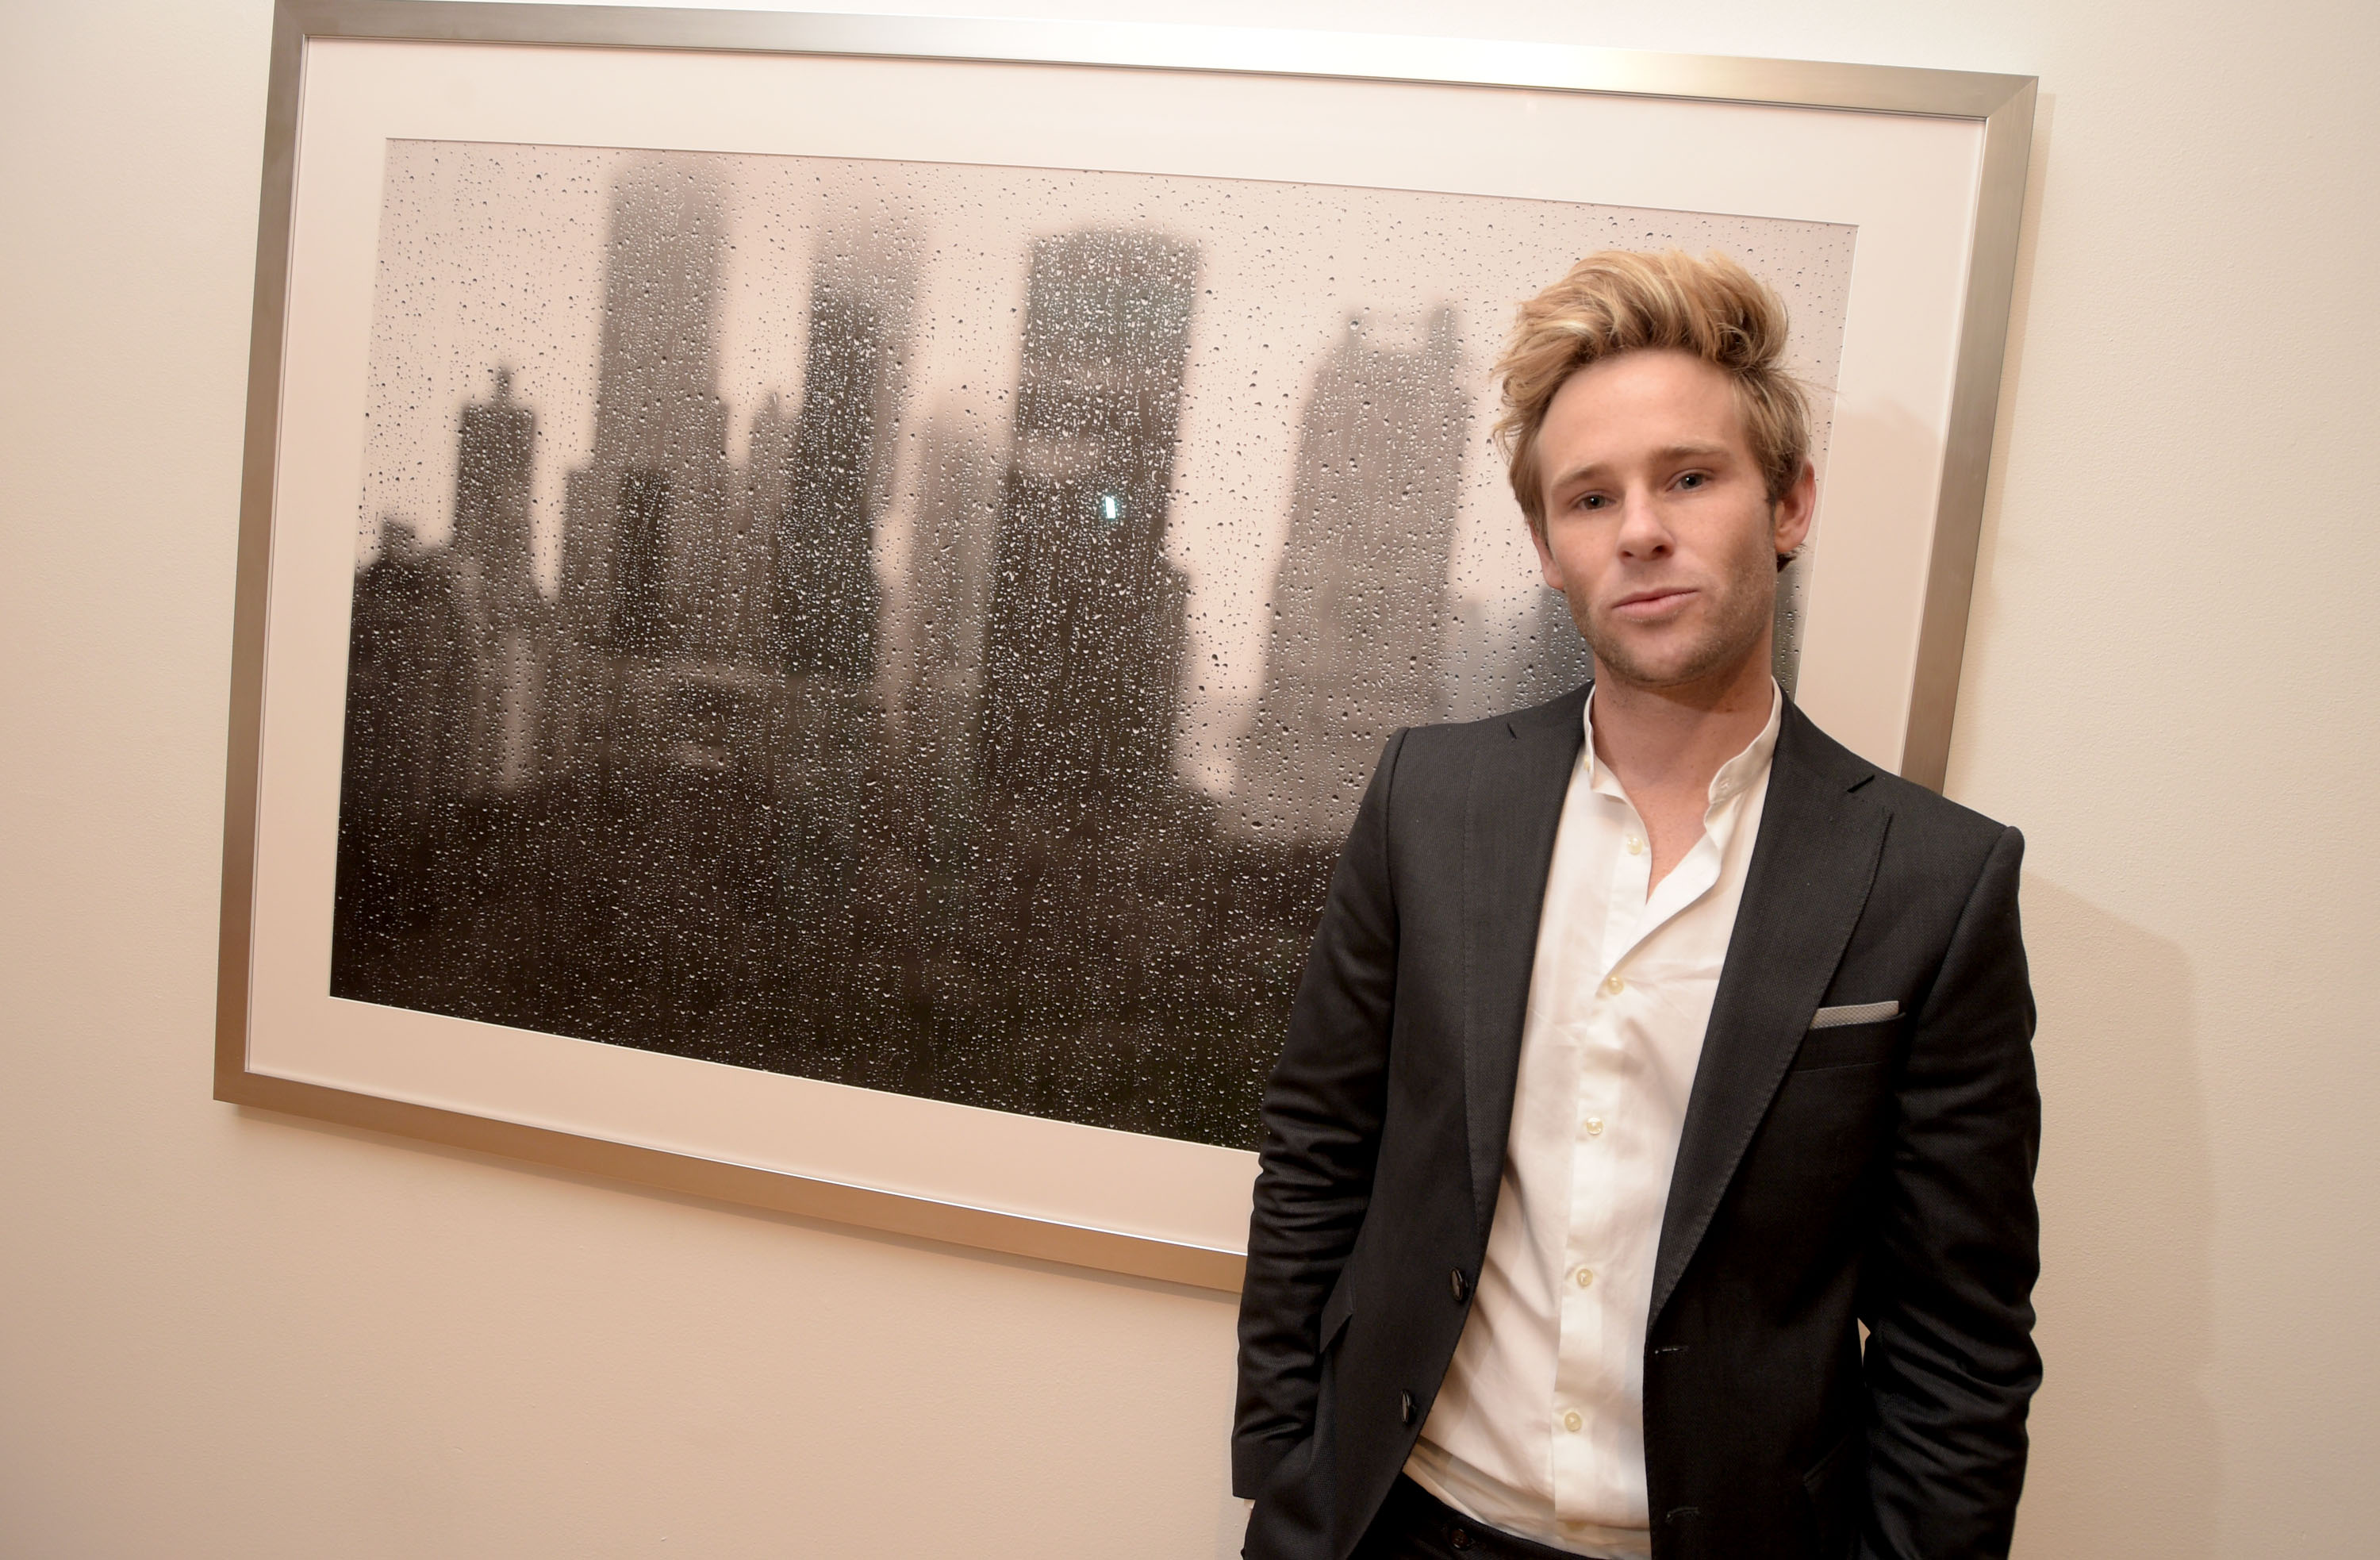 LOS ANGELES, CA - MAY 09: Artist Bryan Fox attends We. Alone. a photography exhibit by Bryan Fox at Think Tank Gallery on May 9, 2015 in Los Angeles, California.